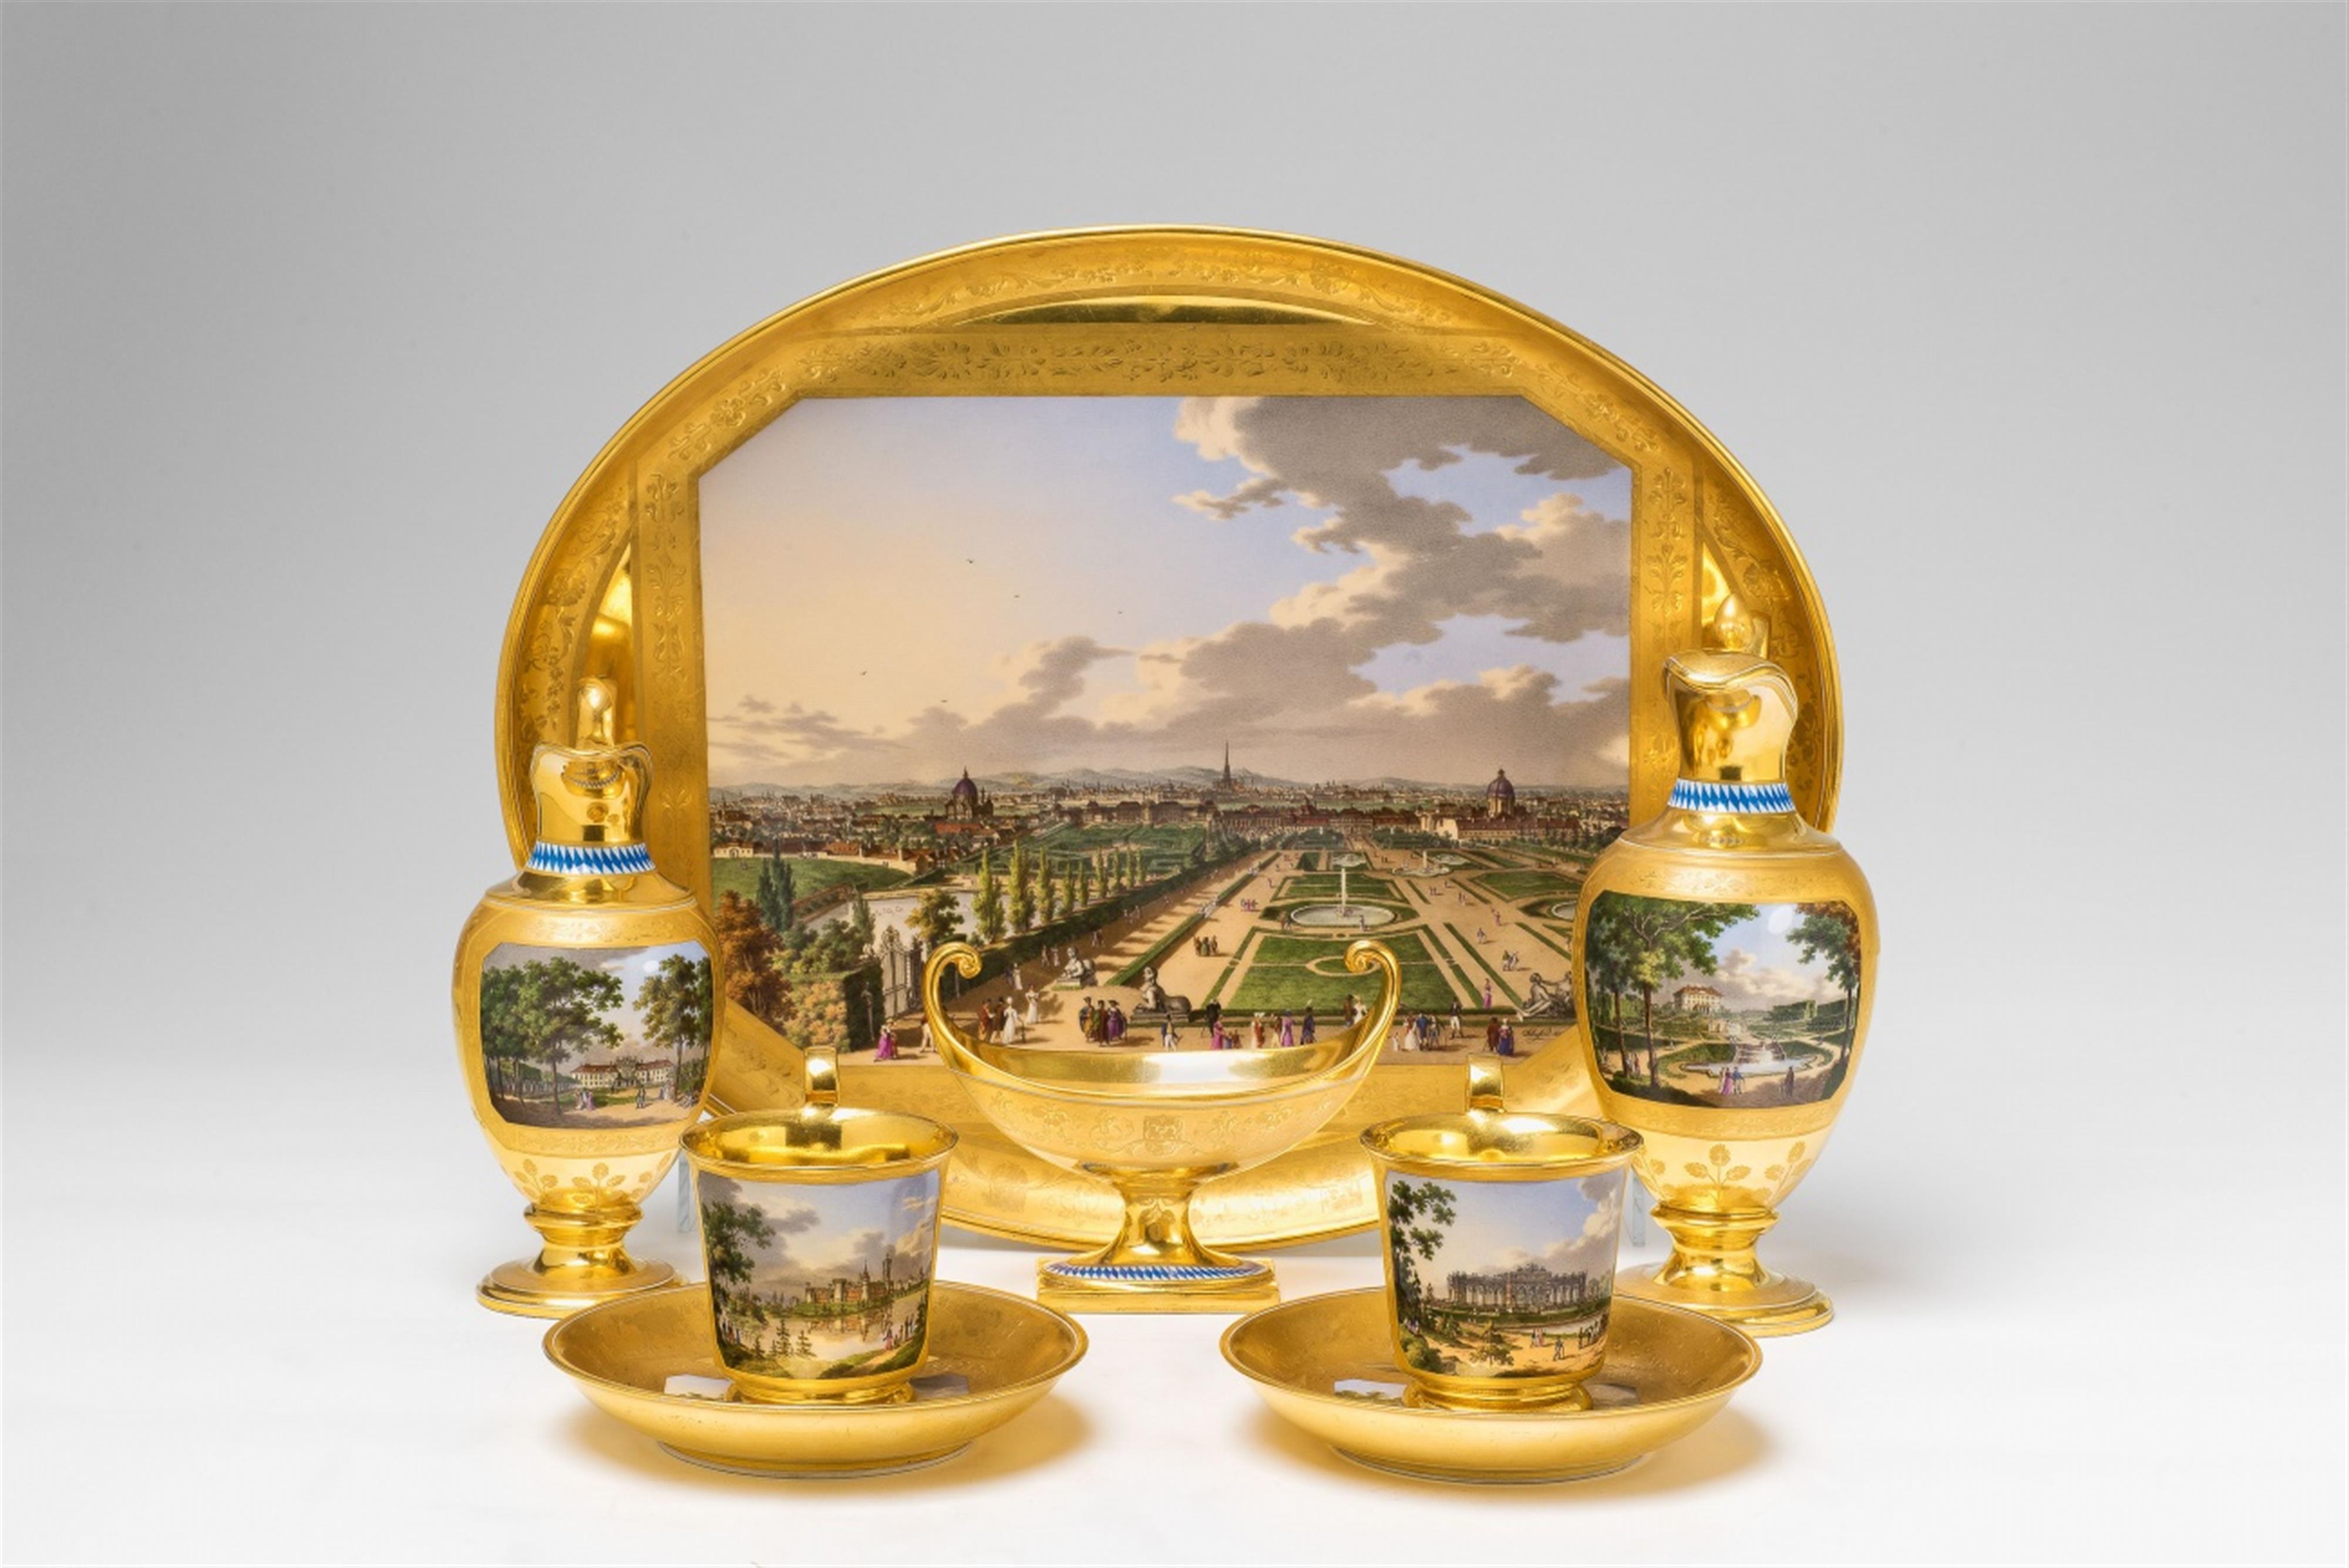 A Niedermayer porcelain déjeuner with views of imperial palaces in Vienna - image-2